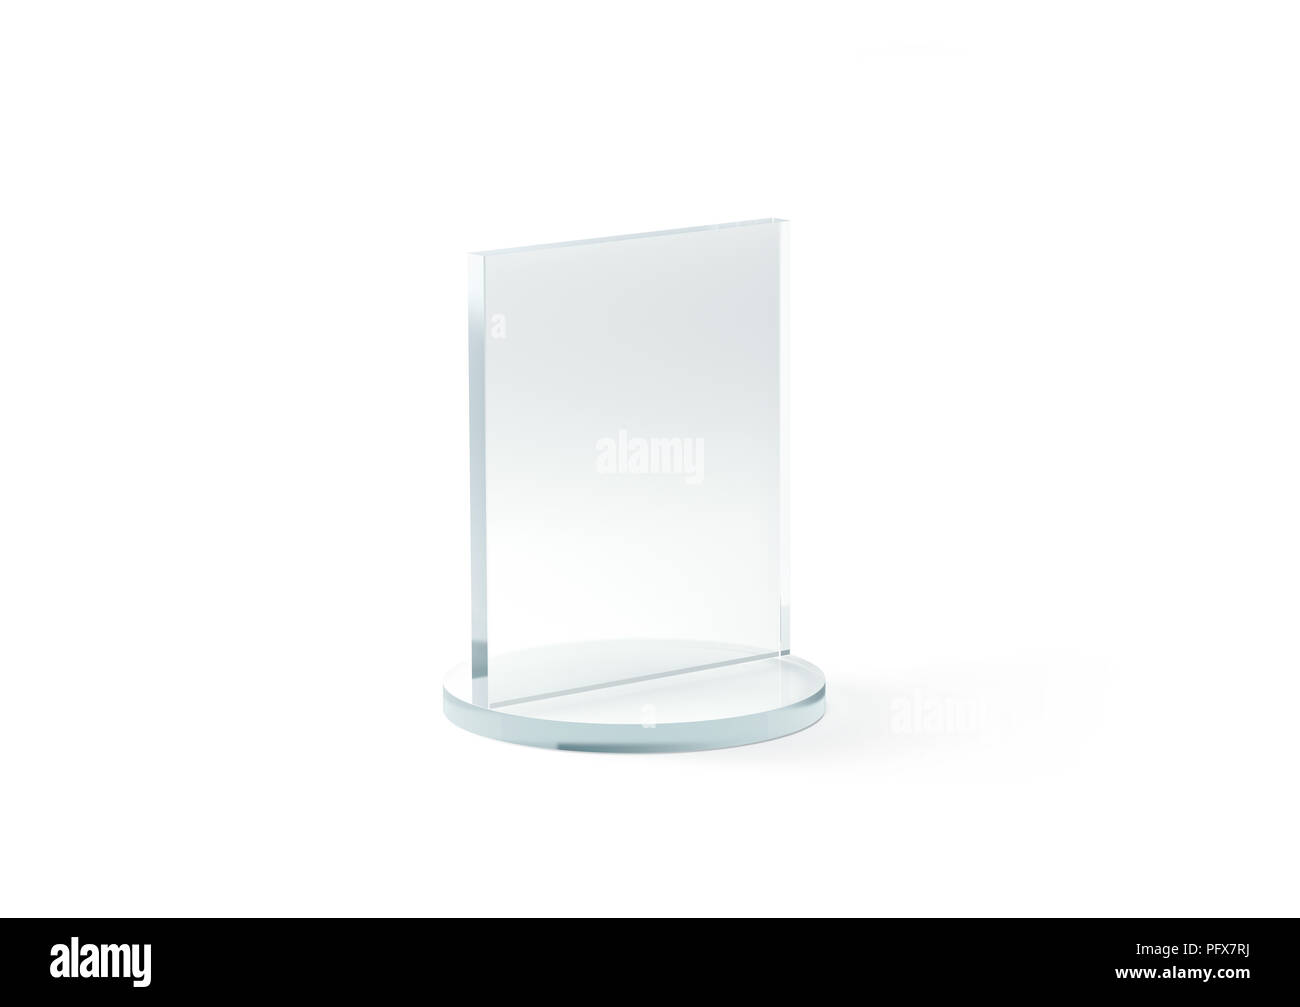 Download Blank Square Glass Trophy Mockup 3d Rendering Empty Acrylic Award Design Mock Up Transparent Realistic Crystal Prize Plate Template Premium First Place Prise Plaque Isolated On White Stock Photo Alamy